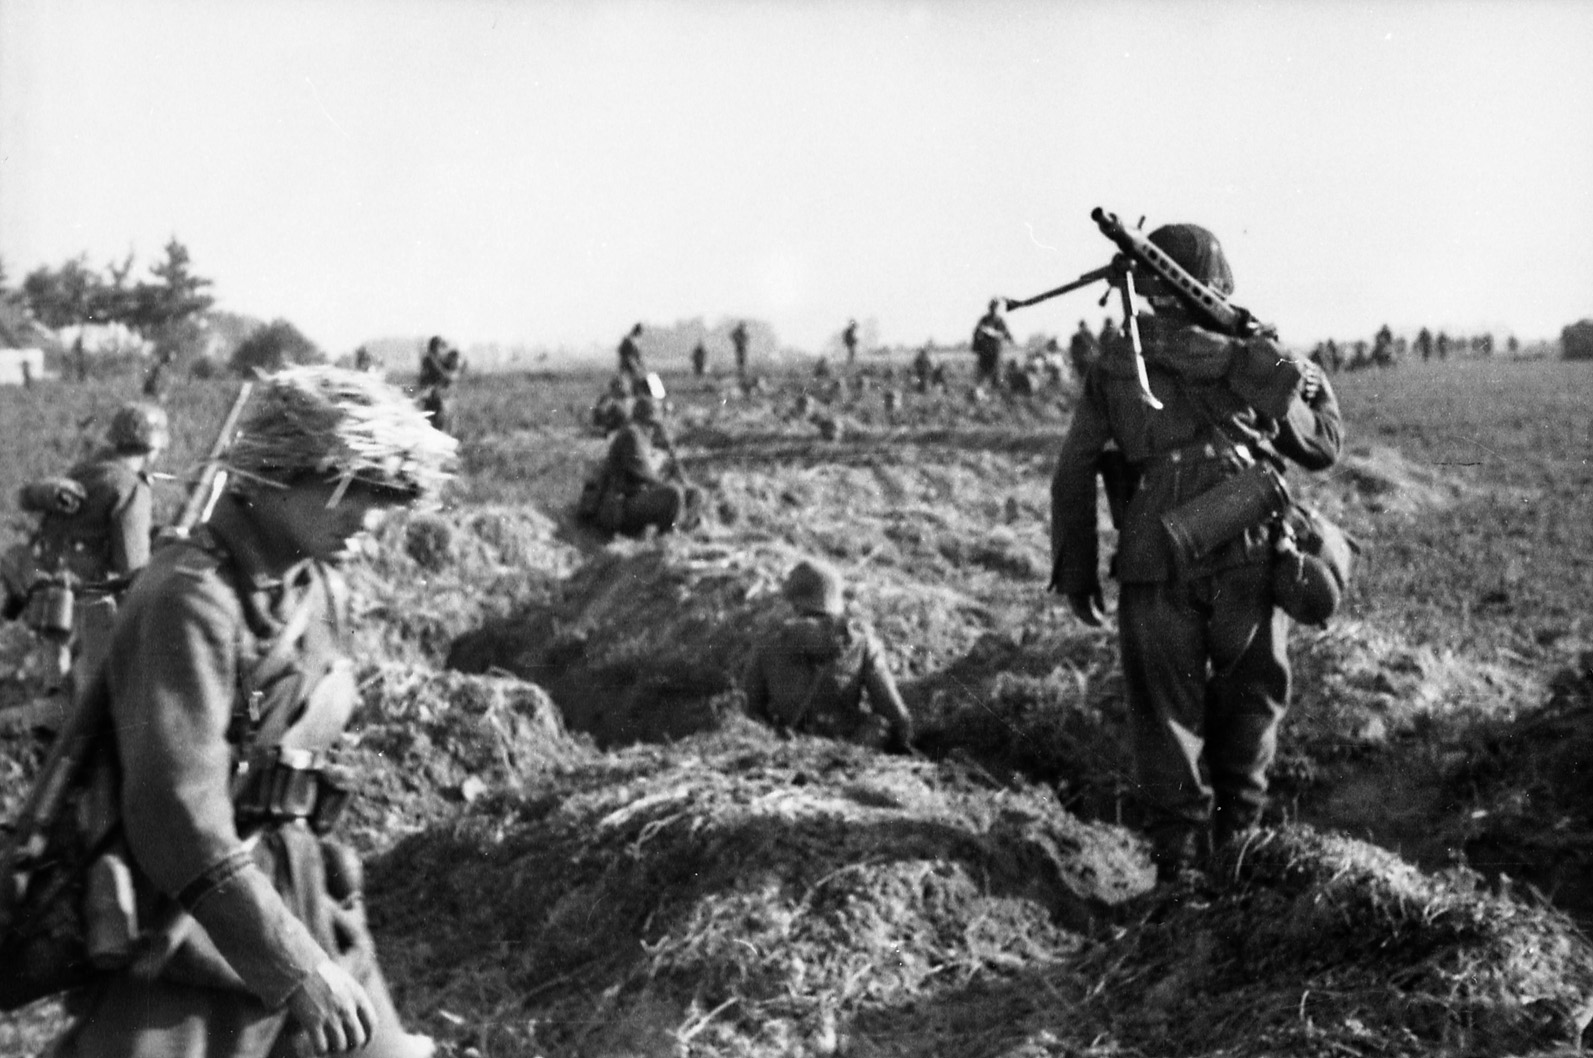 Fighting under the command of Field Marshal Erich von Manstein, panzergrenadiers of the Grossdeutschland Division of Army Group South emerge from trenches and strike out across the Russian steppe during Operation Citadel. One of the soldiers carries a light machine gun over his shoulder. 